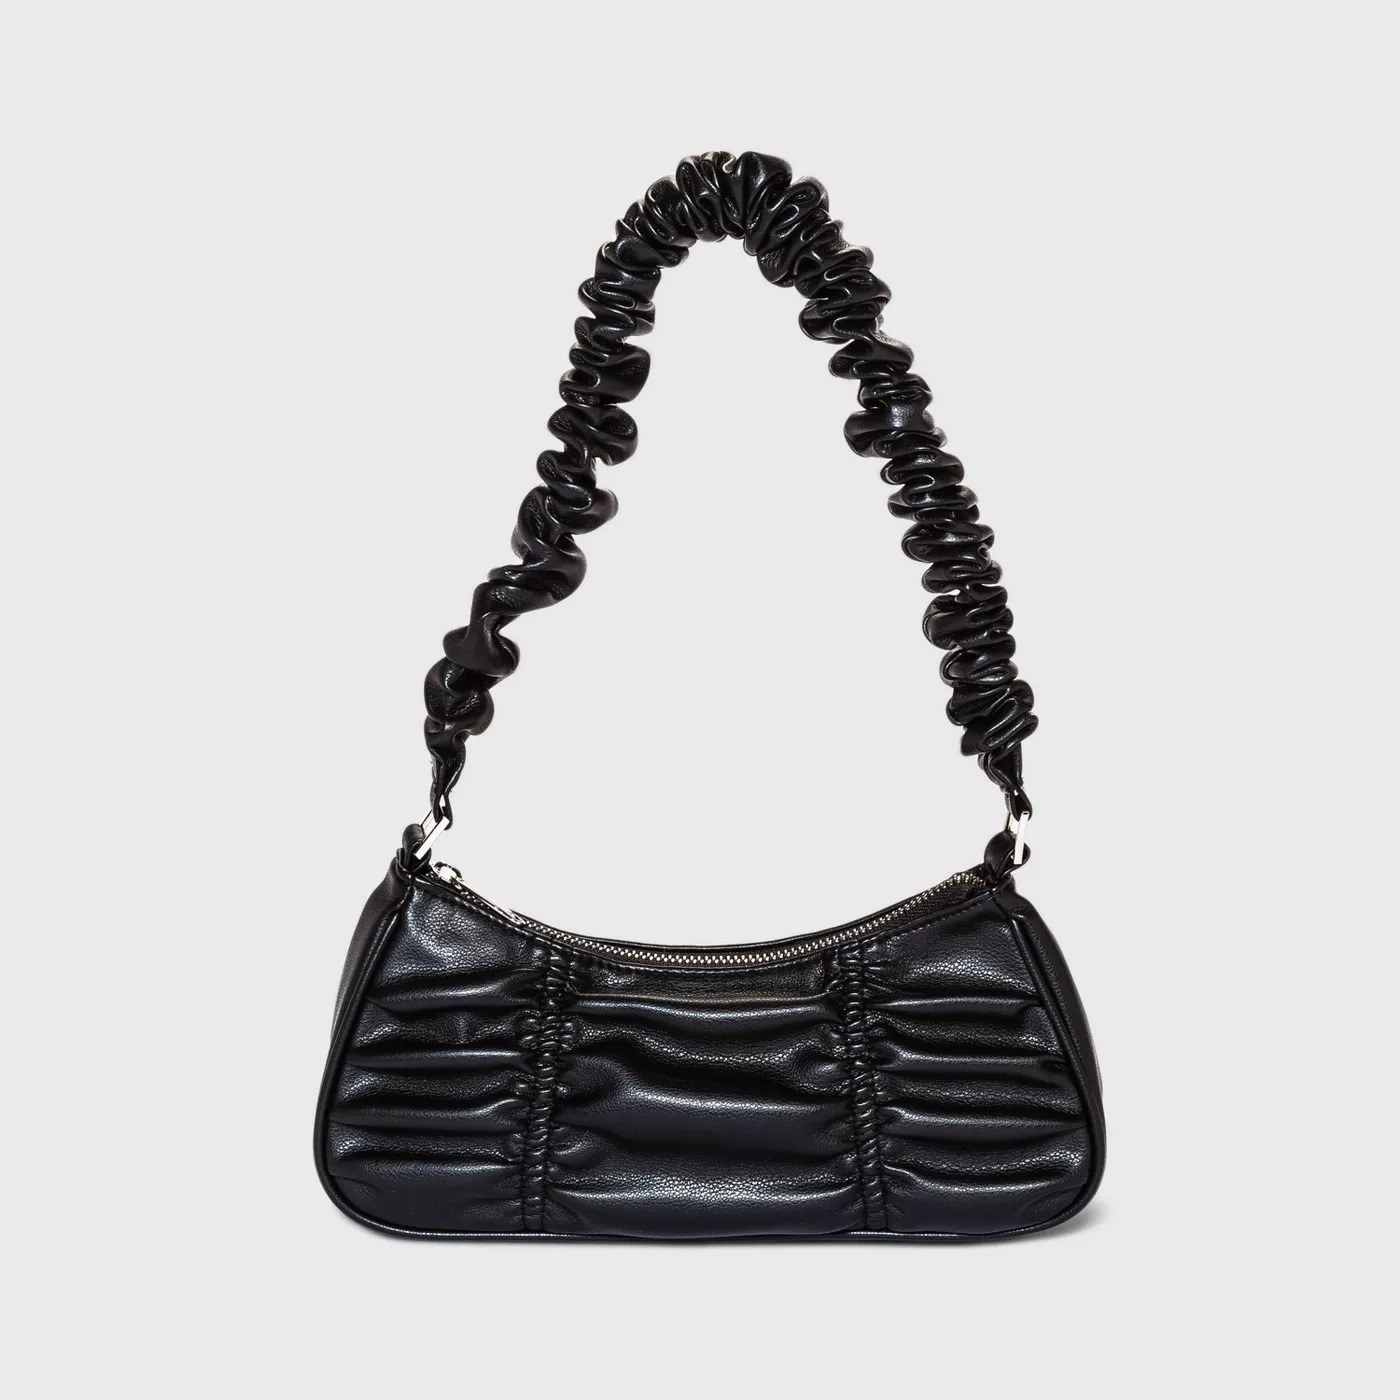 the black purse with pleated detail, silver zipper